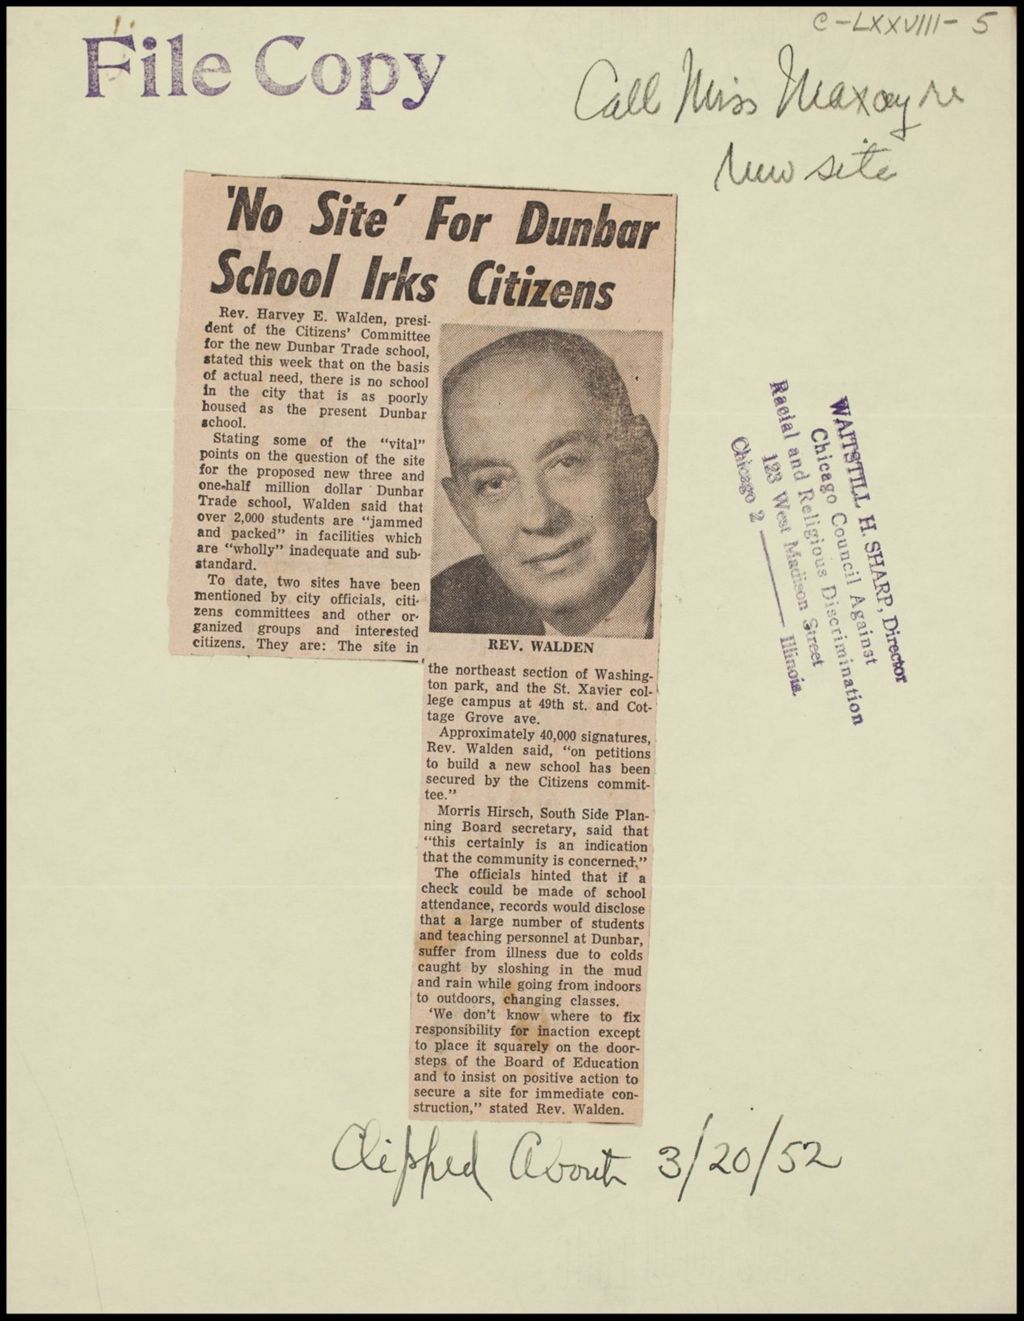 Miniature of Chicago Council Against Racial and Religious Discrimination, 1952-1954 (Folder II-2322)